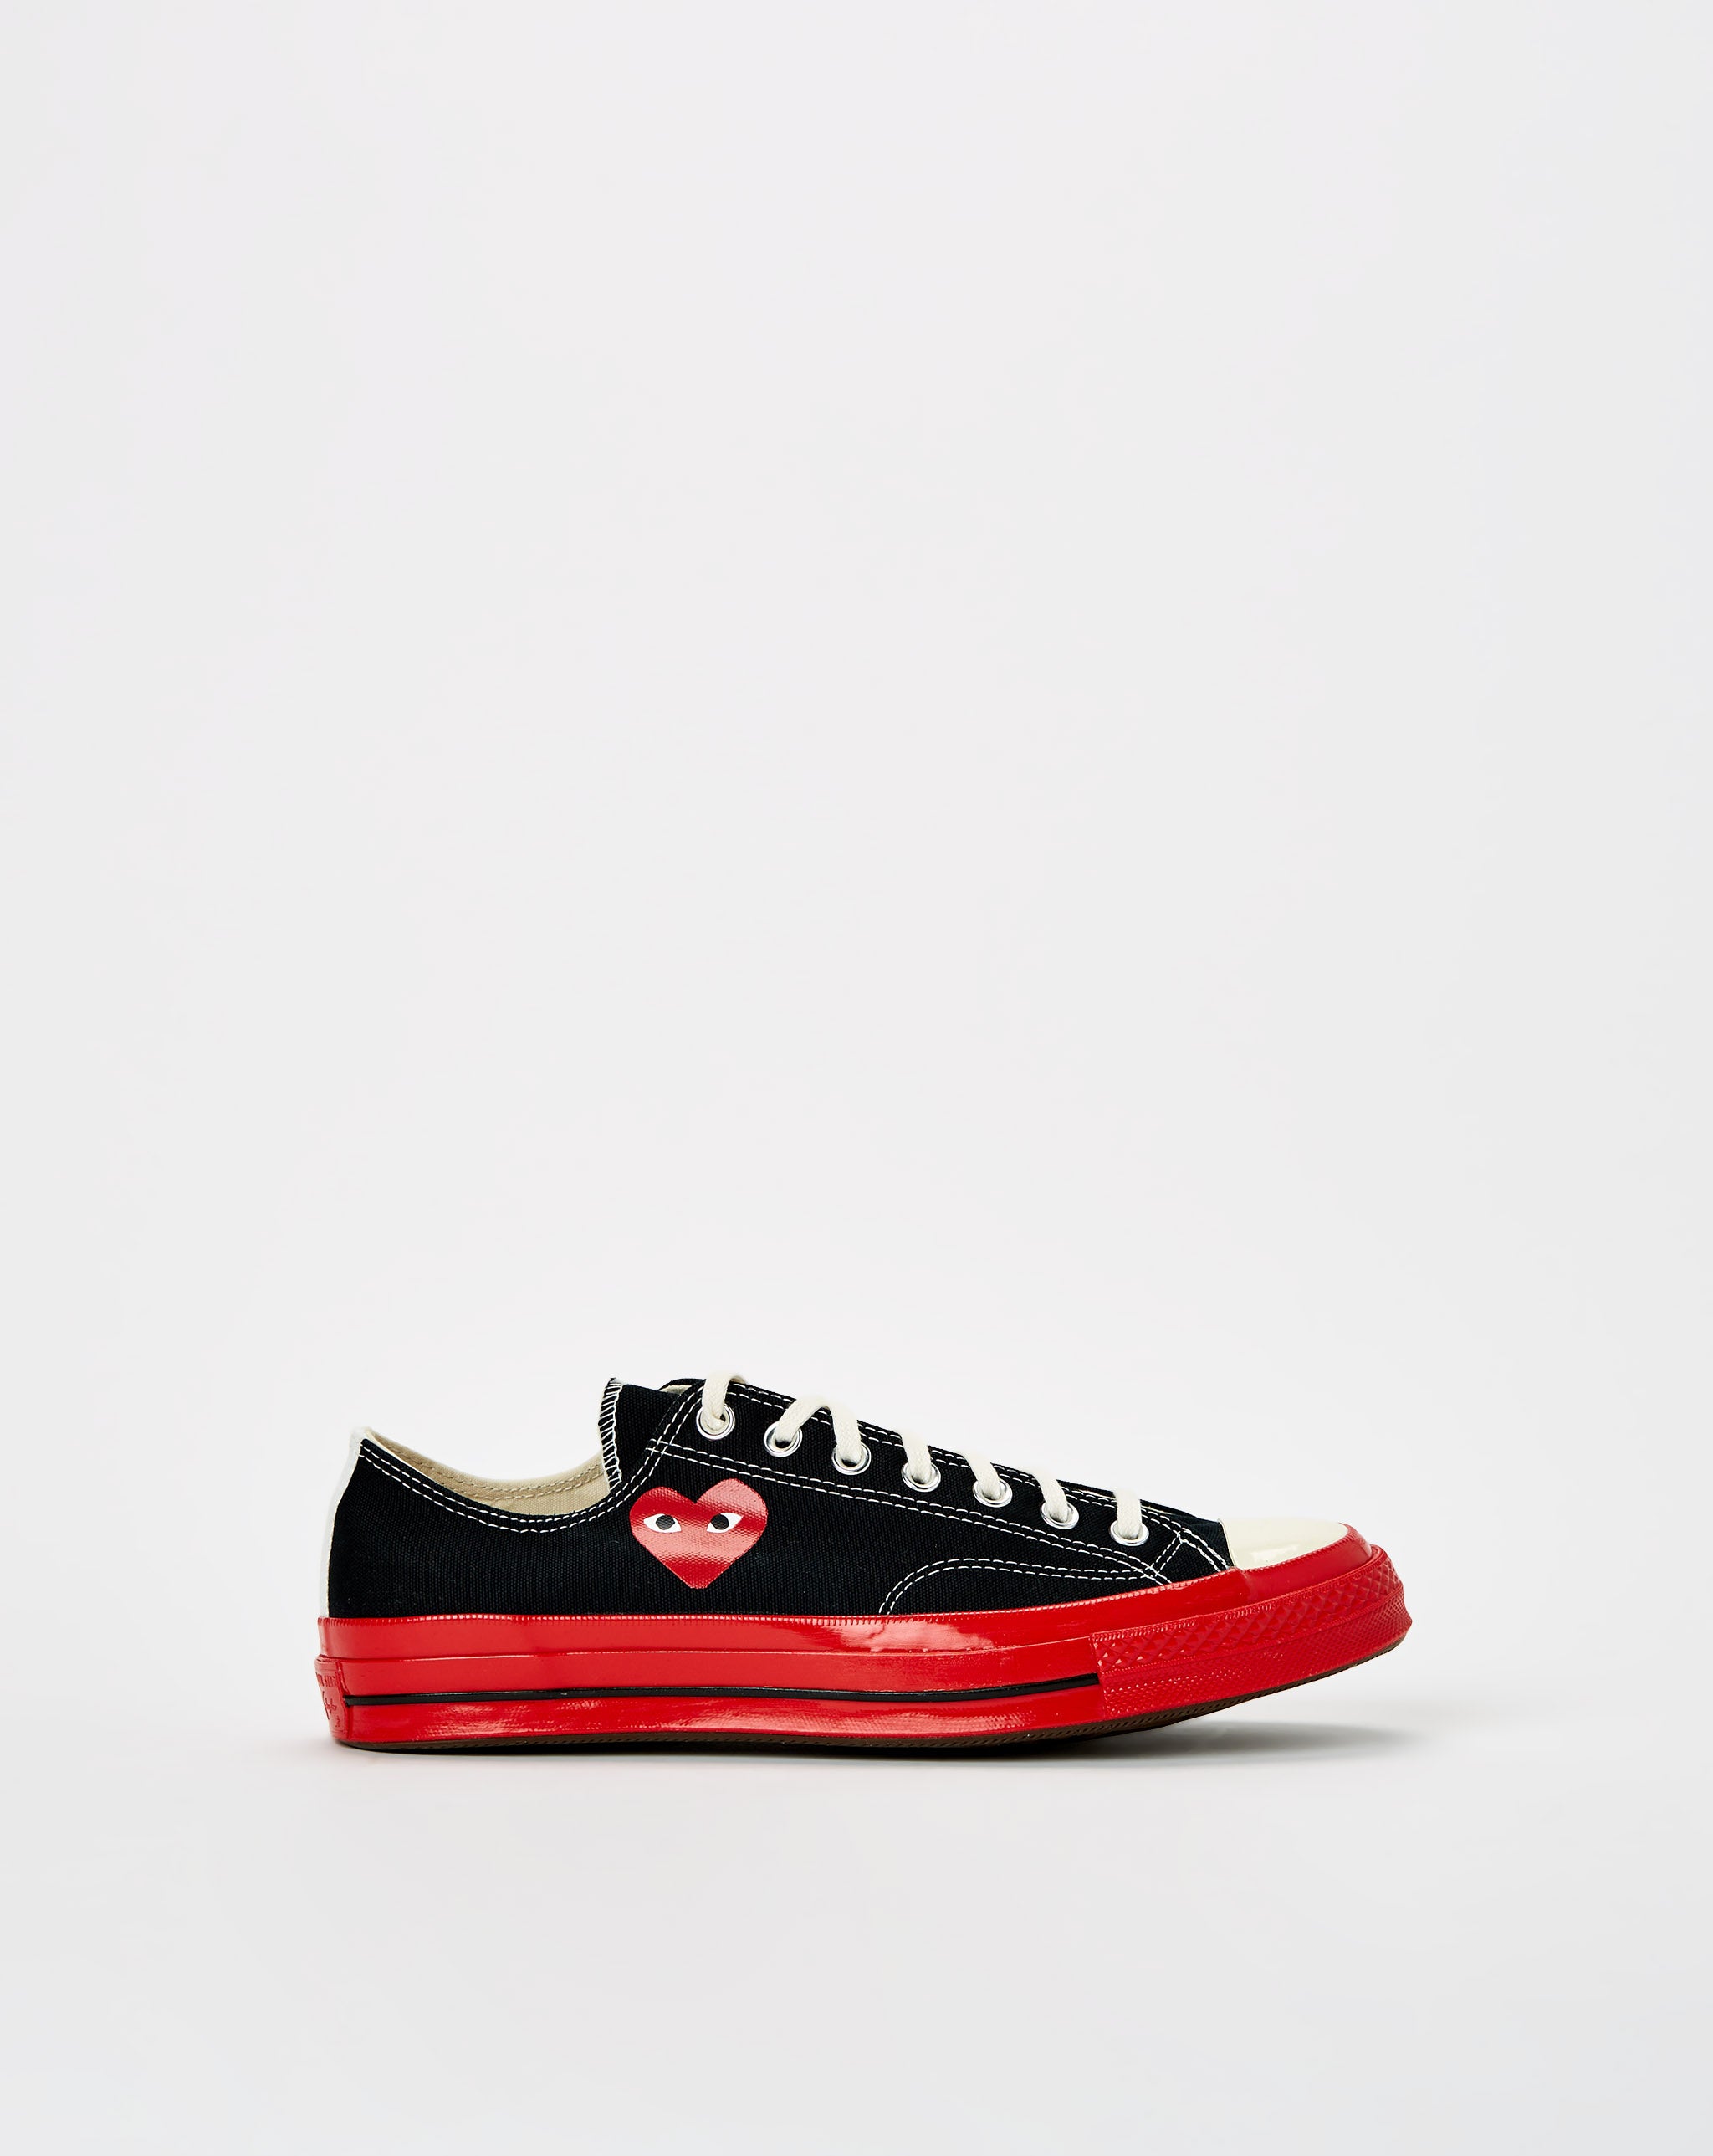 Converse and Patta and Converse retailers  - Cheap Cerbe Jordan outlet